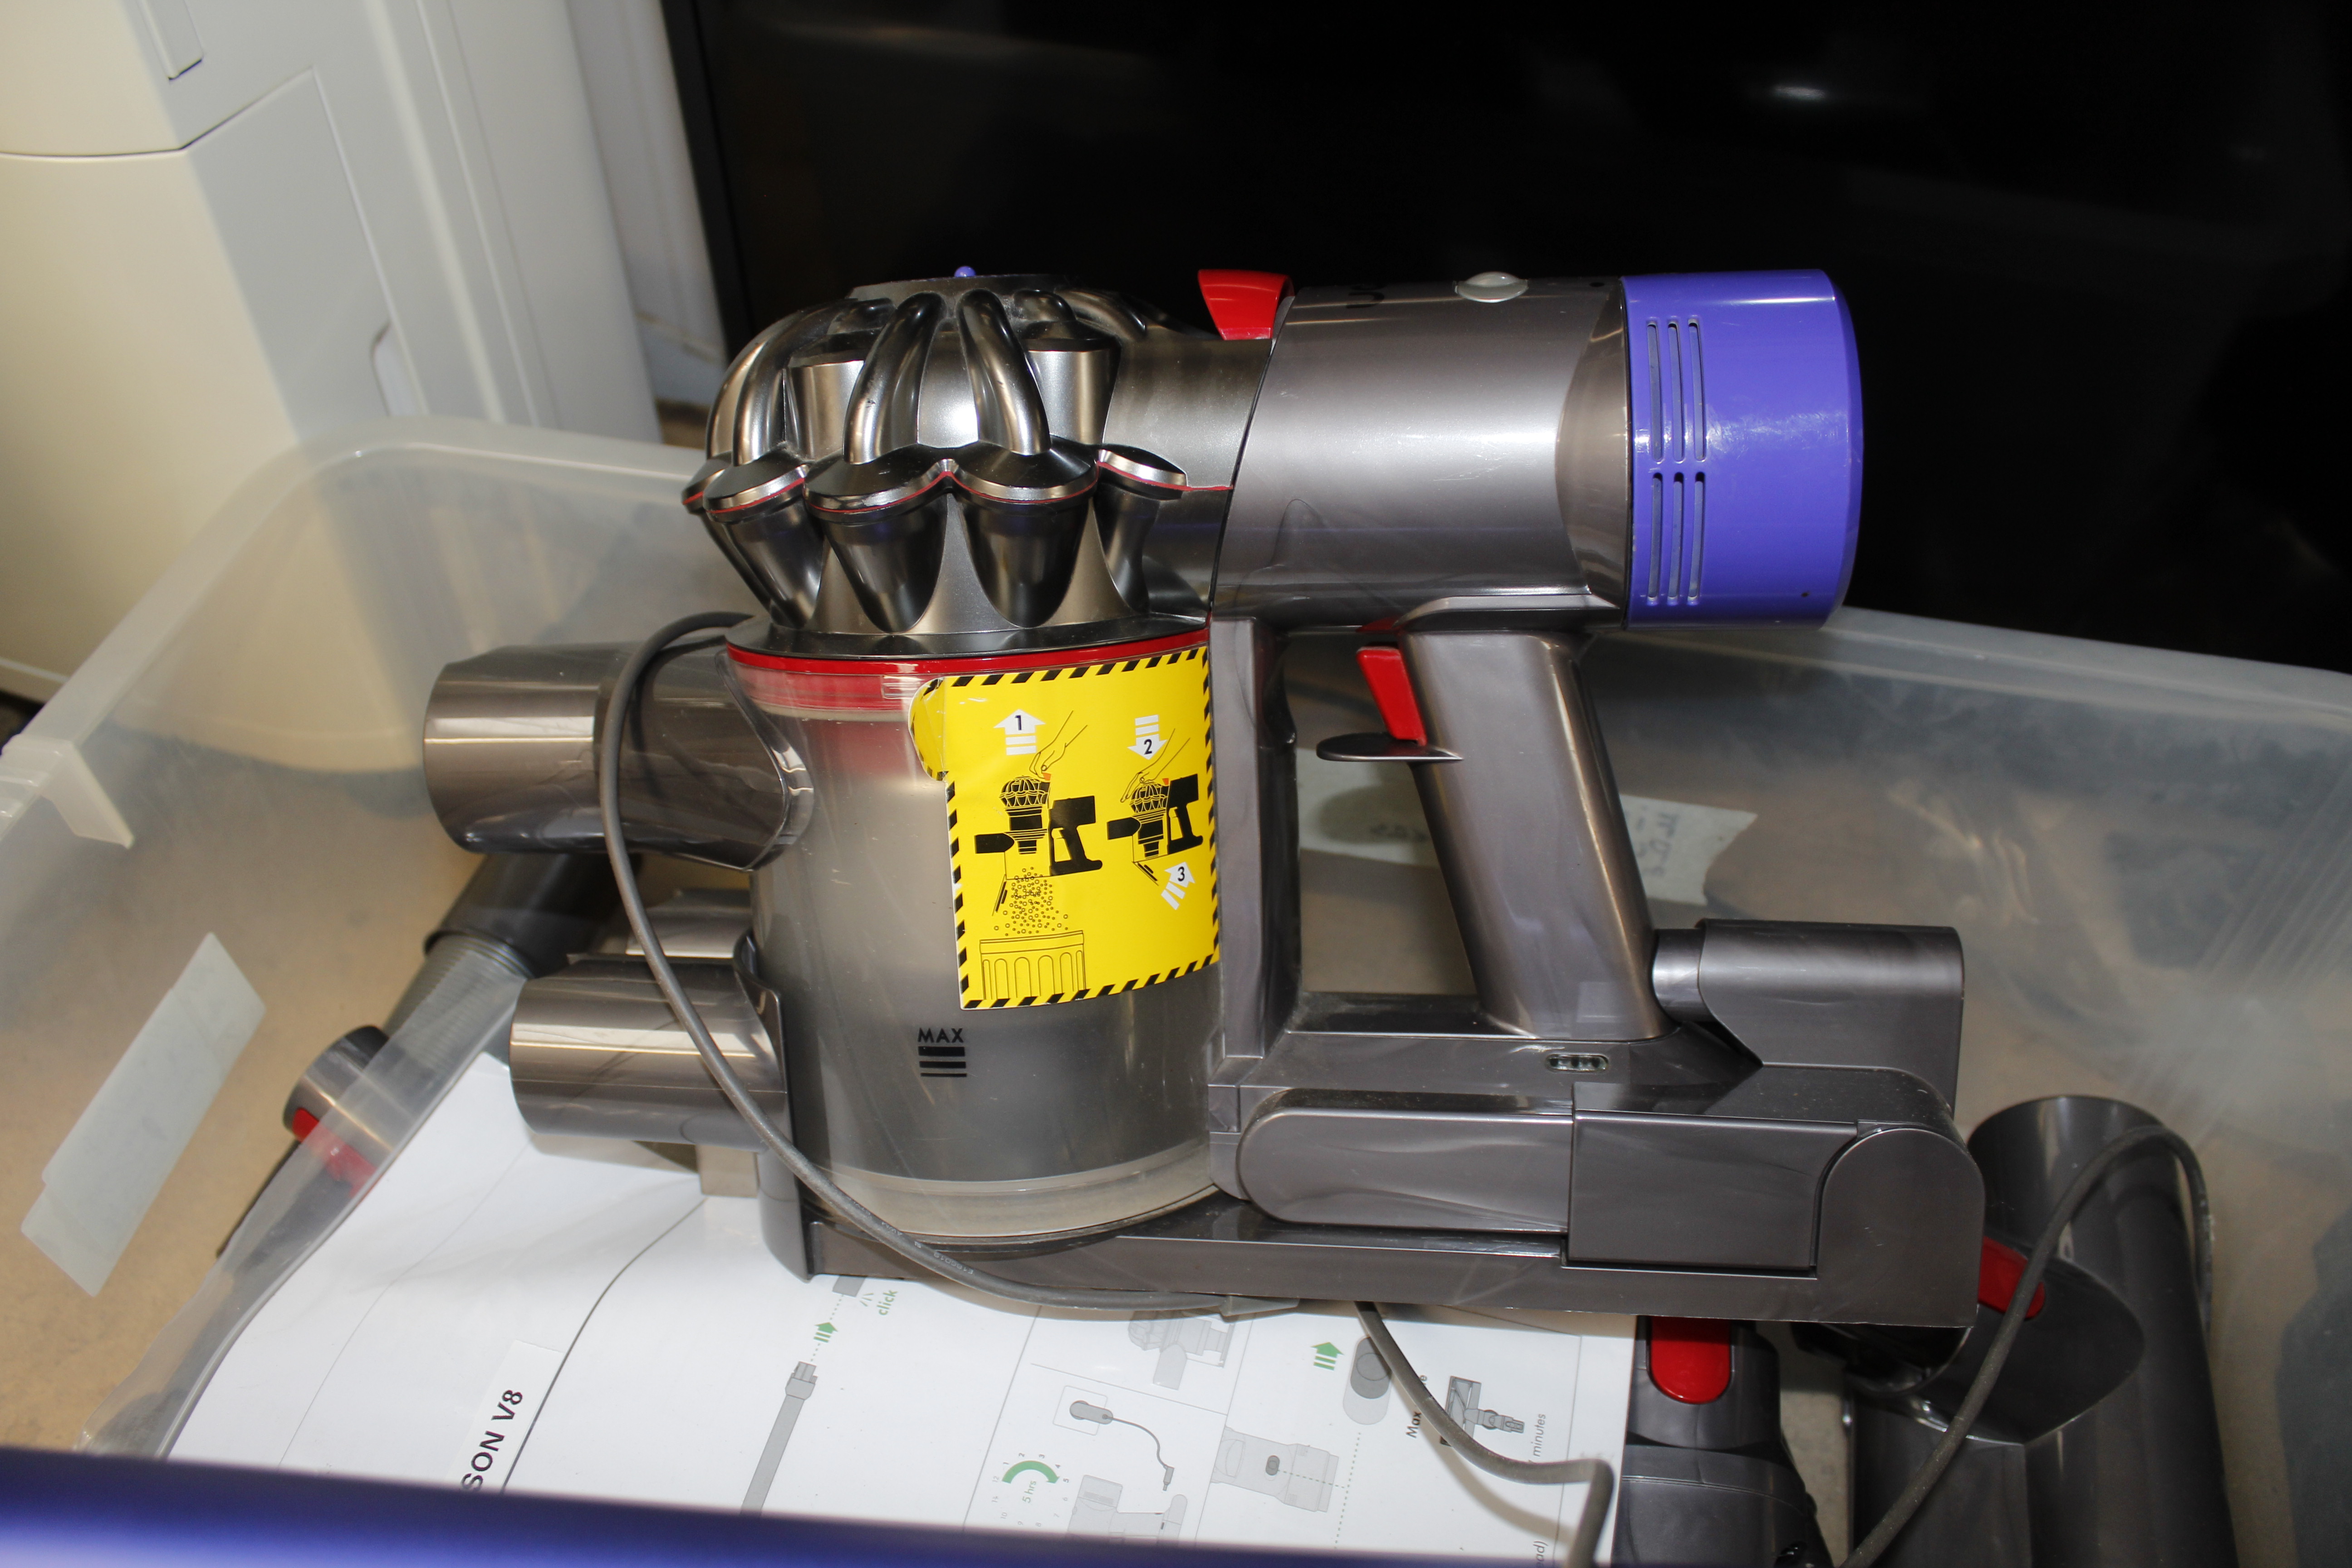 A Dyson V8 vacuum cleaner with various accessories - Image 2 of 2